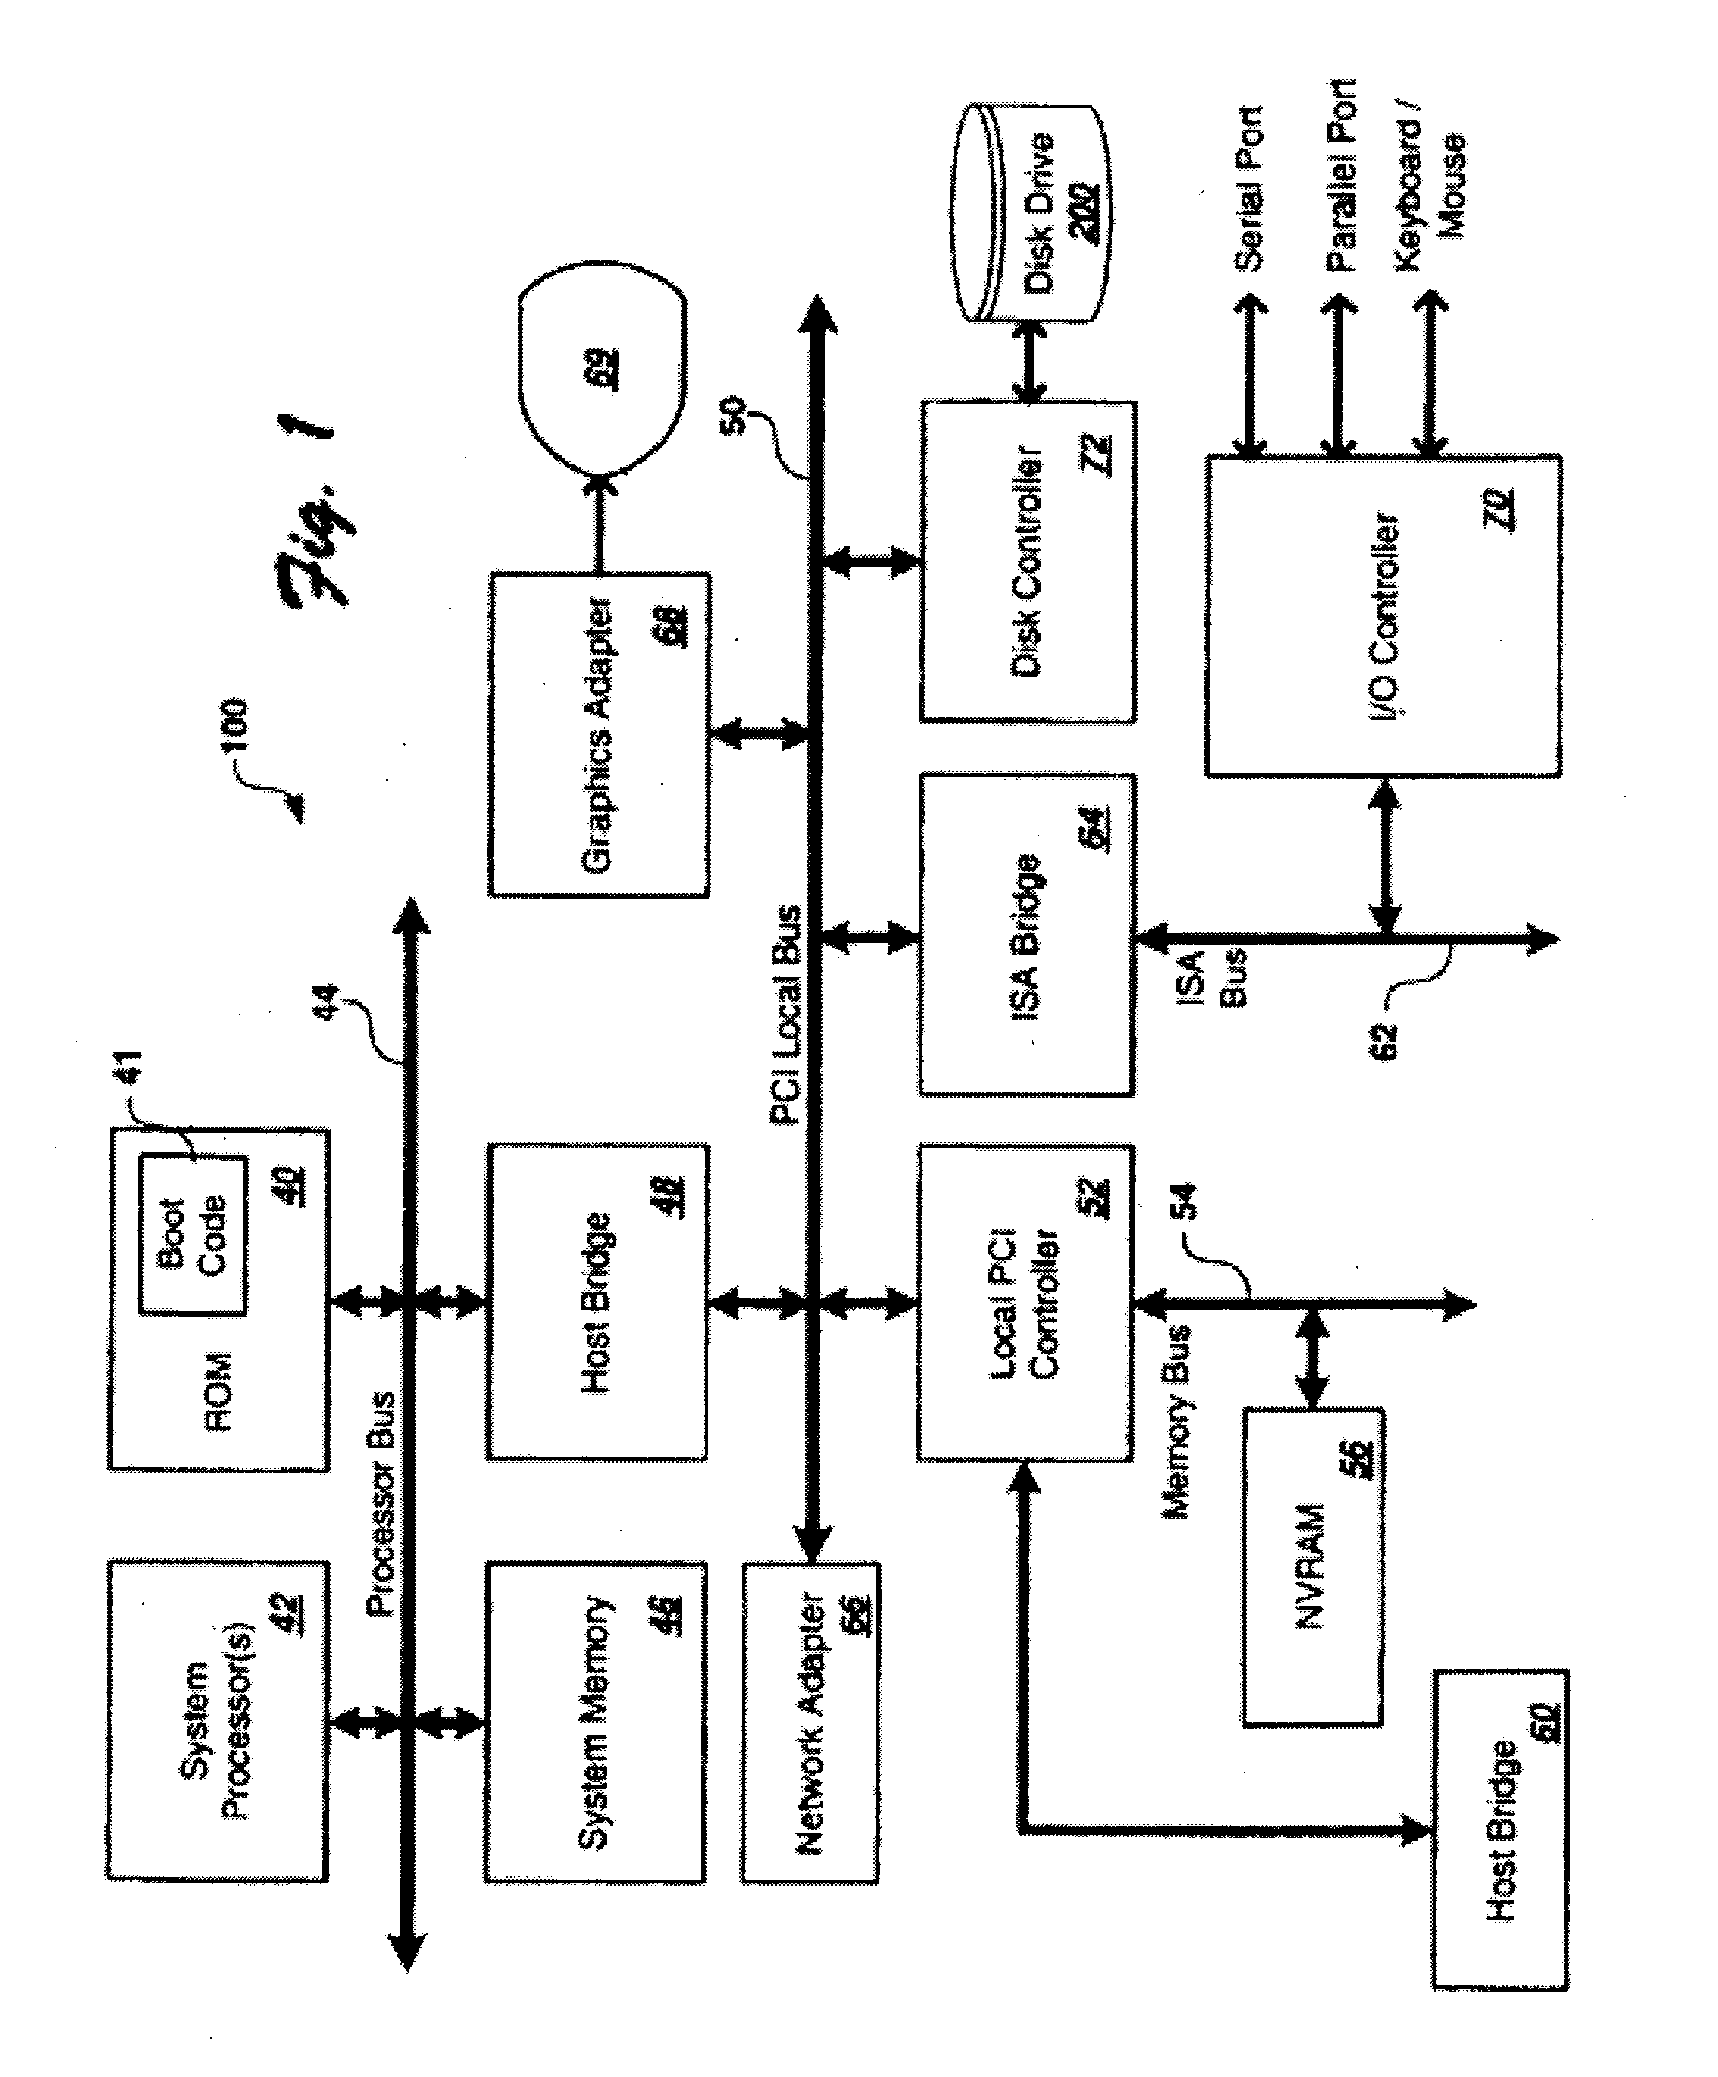 Method for power capping with co-operative dynamic voltage and frequency scaling